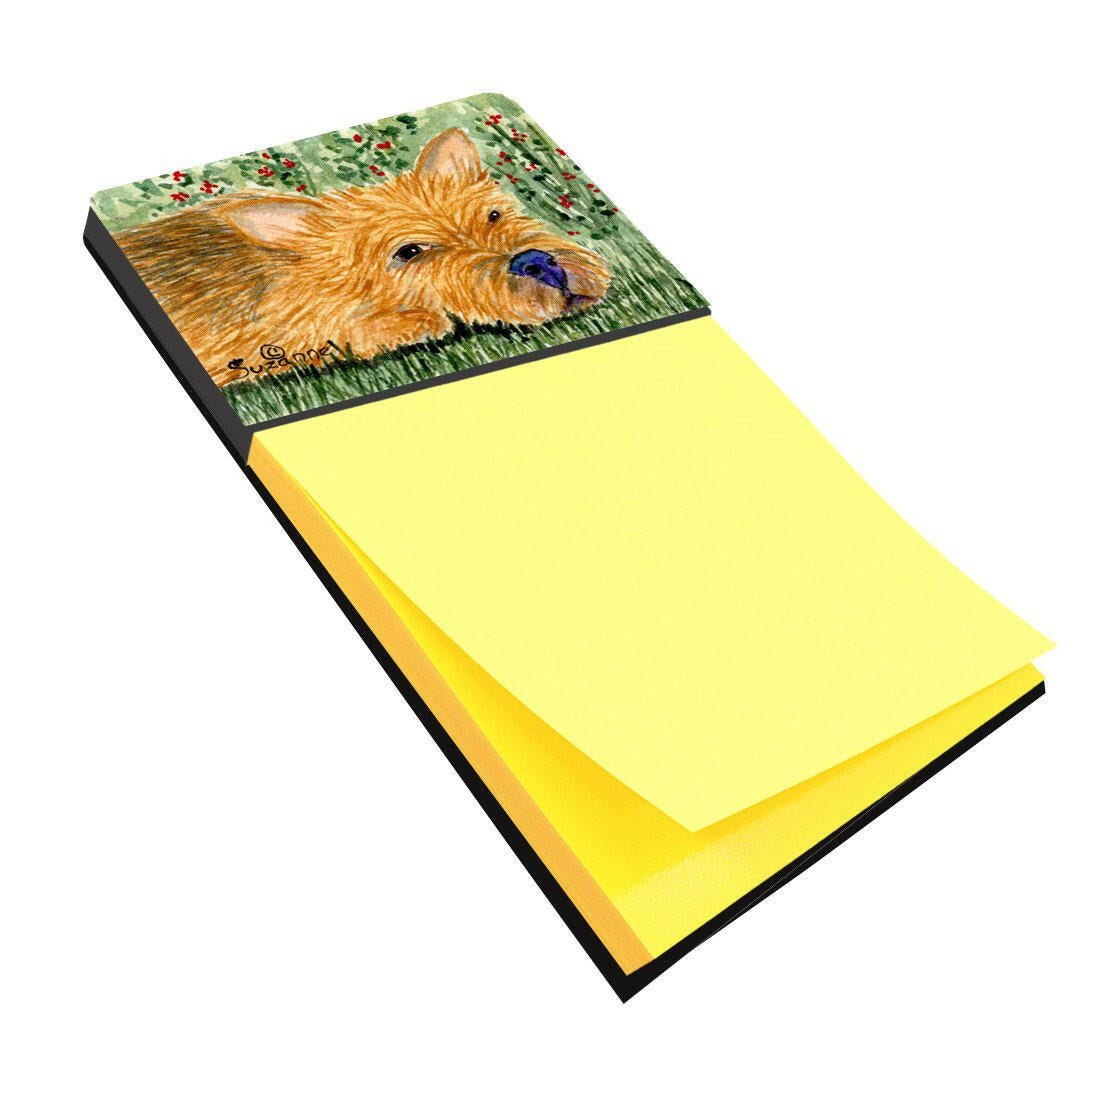 Norwich Terrier Refiillable Sticky Note Holder or Postit Note Dispenser SS8862SN by Caroline's Treasures